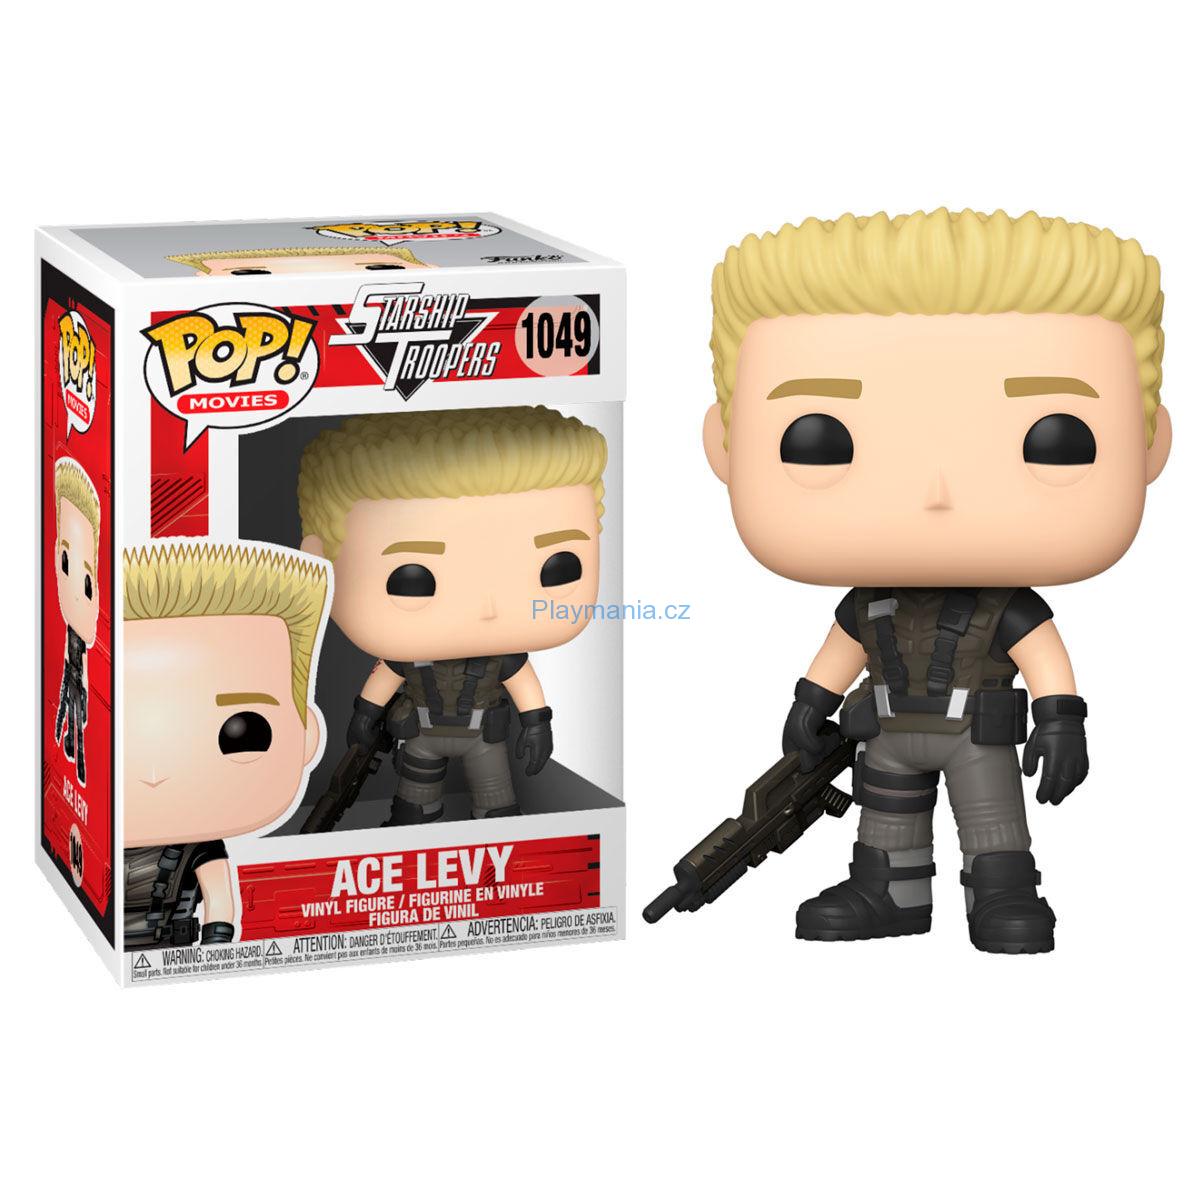 FUNKO POP ! STARSHIP TROOPERS ACE LEVY (1049)